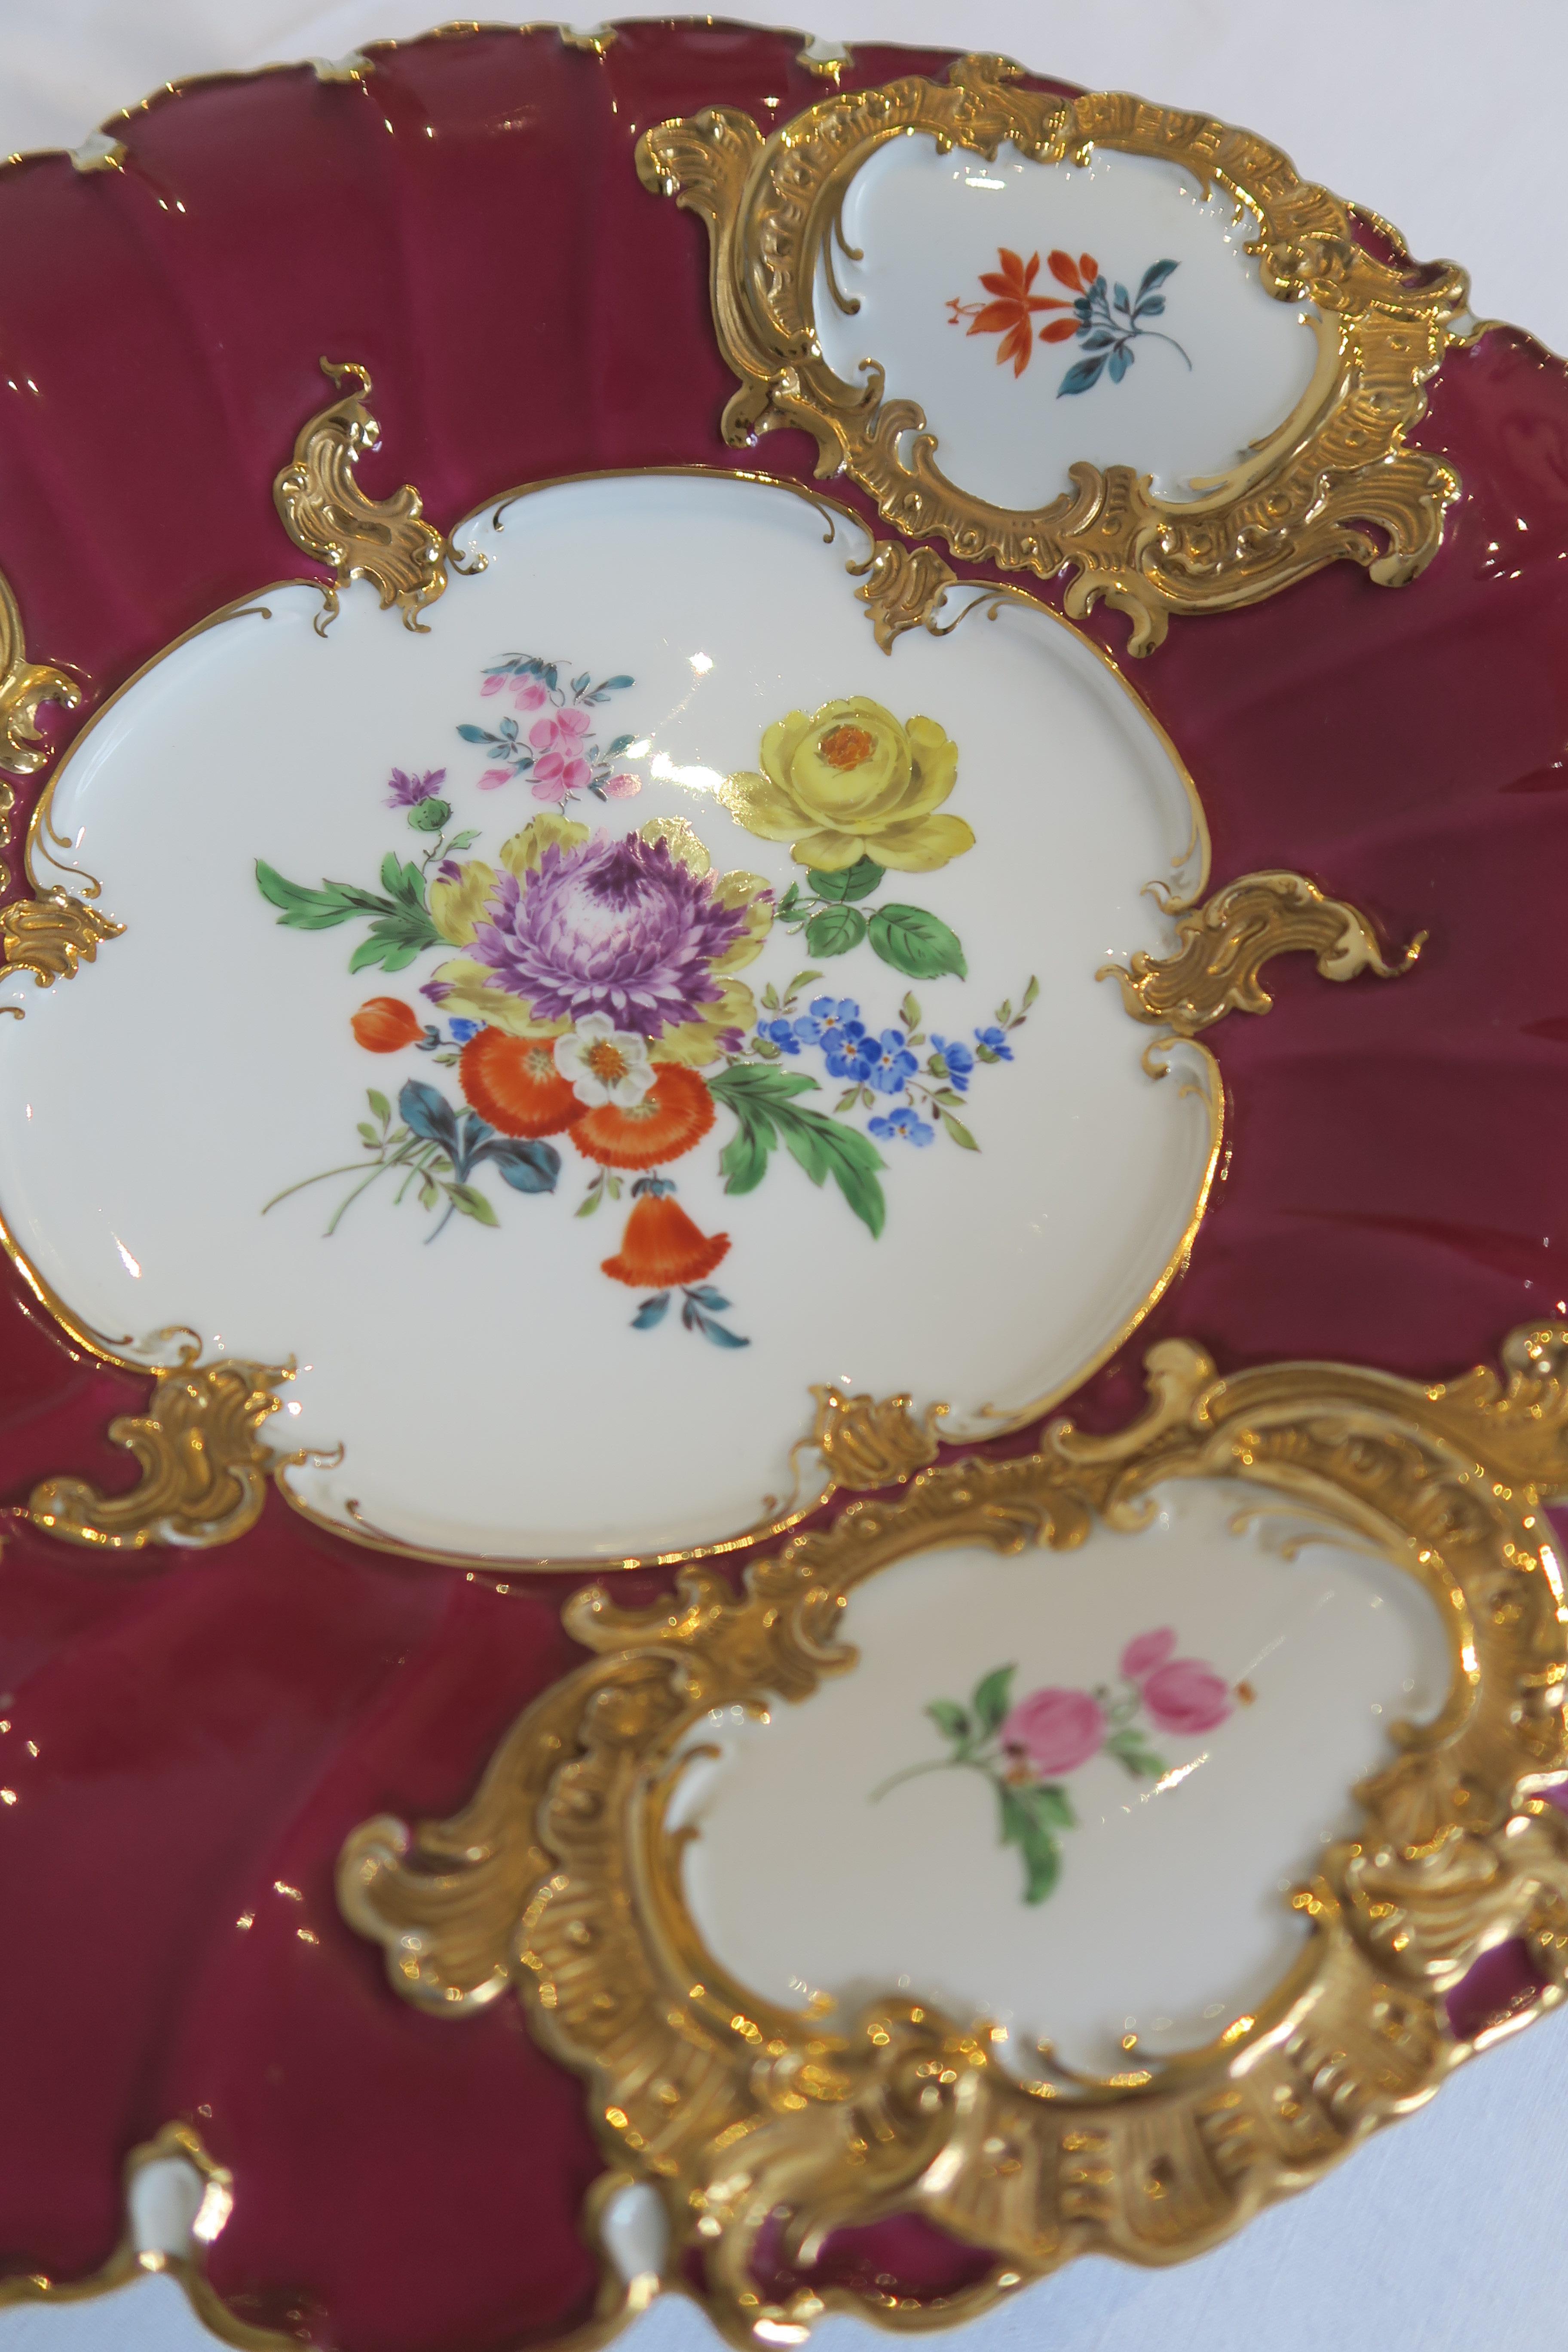 Original fruit bowl/serving bowl by German porcelain manufacturer Meissen featuring beautiful hand-painted floral designs and a gilded ornamental rim. The plate's main colours are white and a vibrant magenta. Excellent condition. No chips, dents or